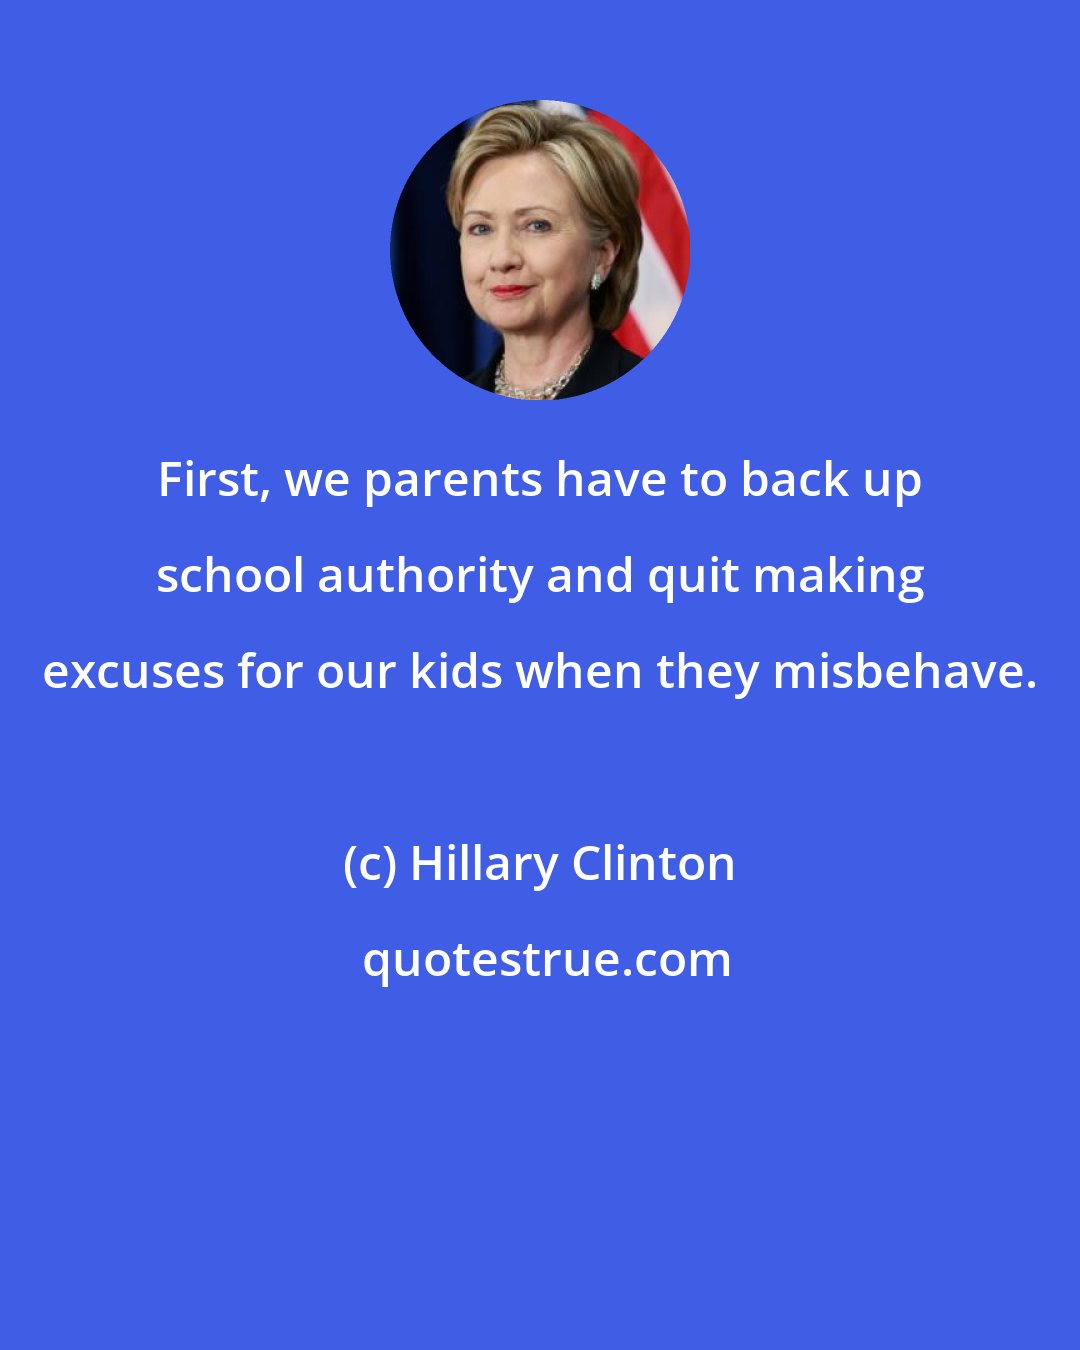 Hillary Clinton: First, we parents have to back up school authority and quit making excuses for our kids when they misbehave.